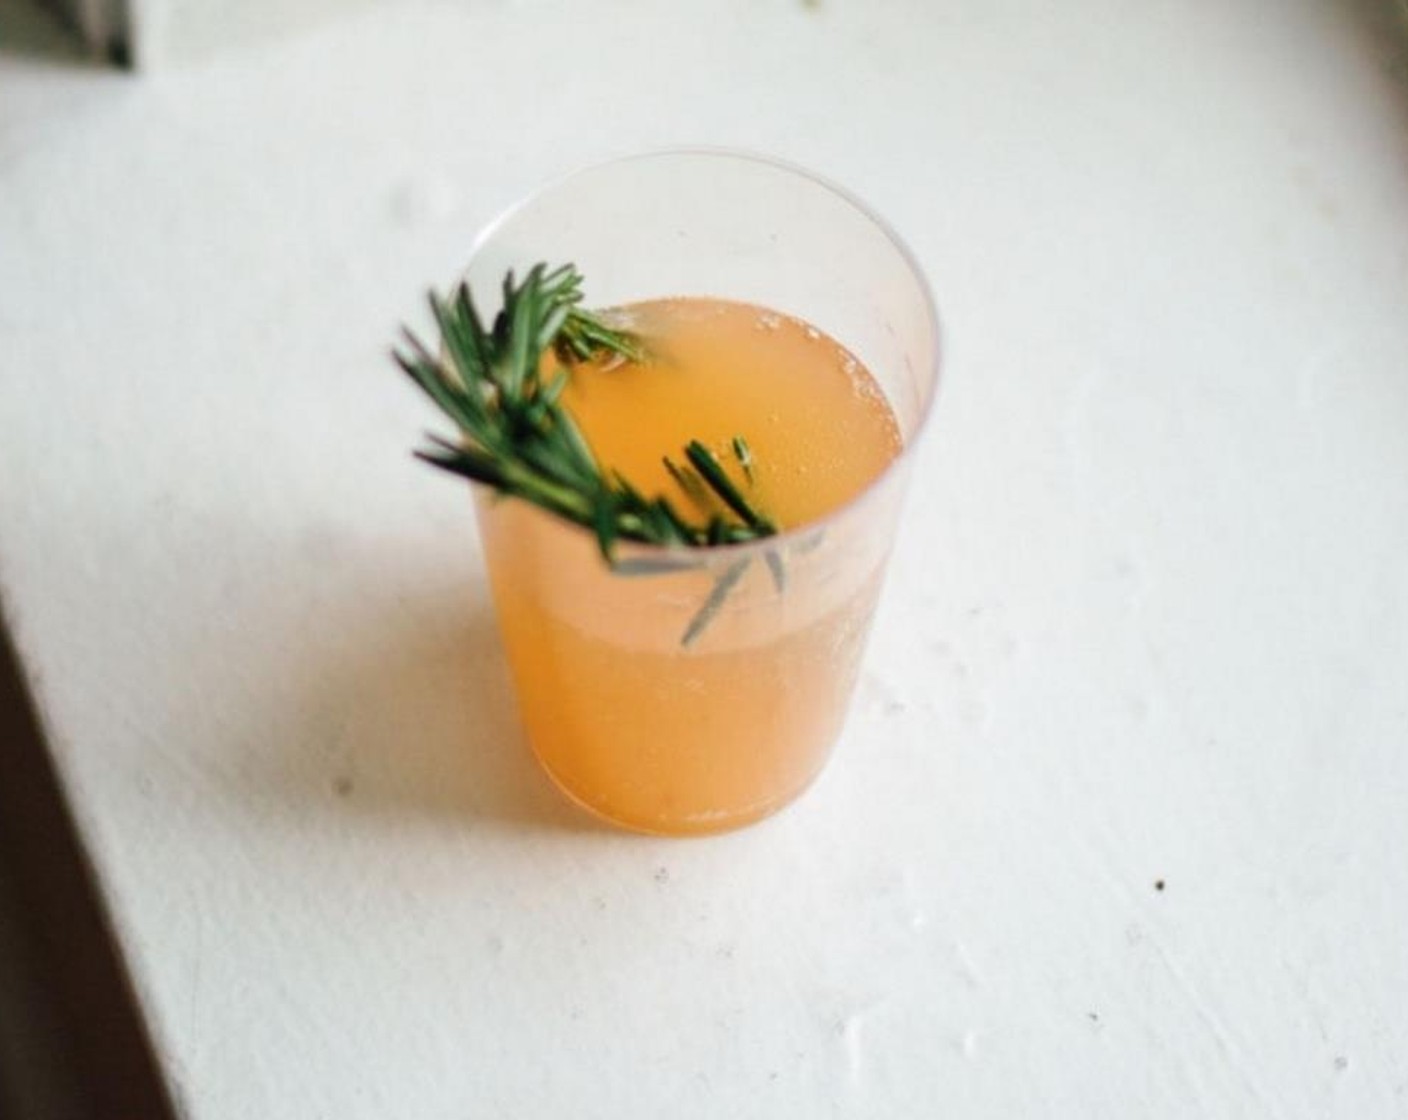 step 3 Top off with Champagne (to taste) and garnish with Fresh Rosemary (to taste).